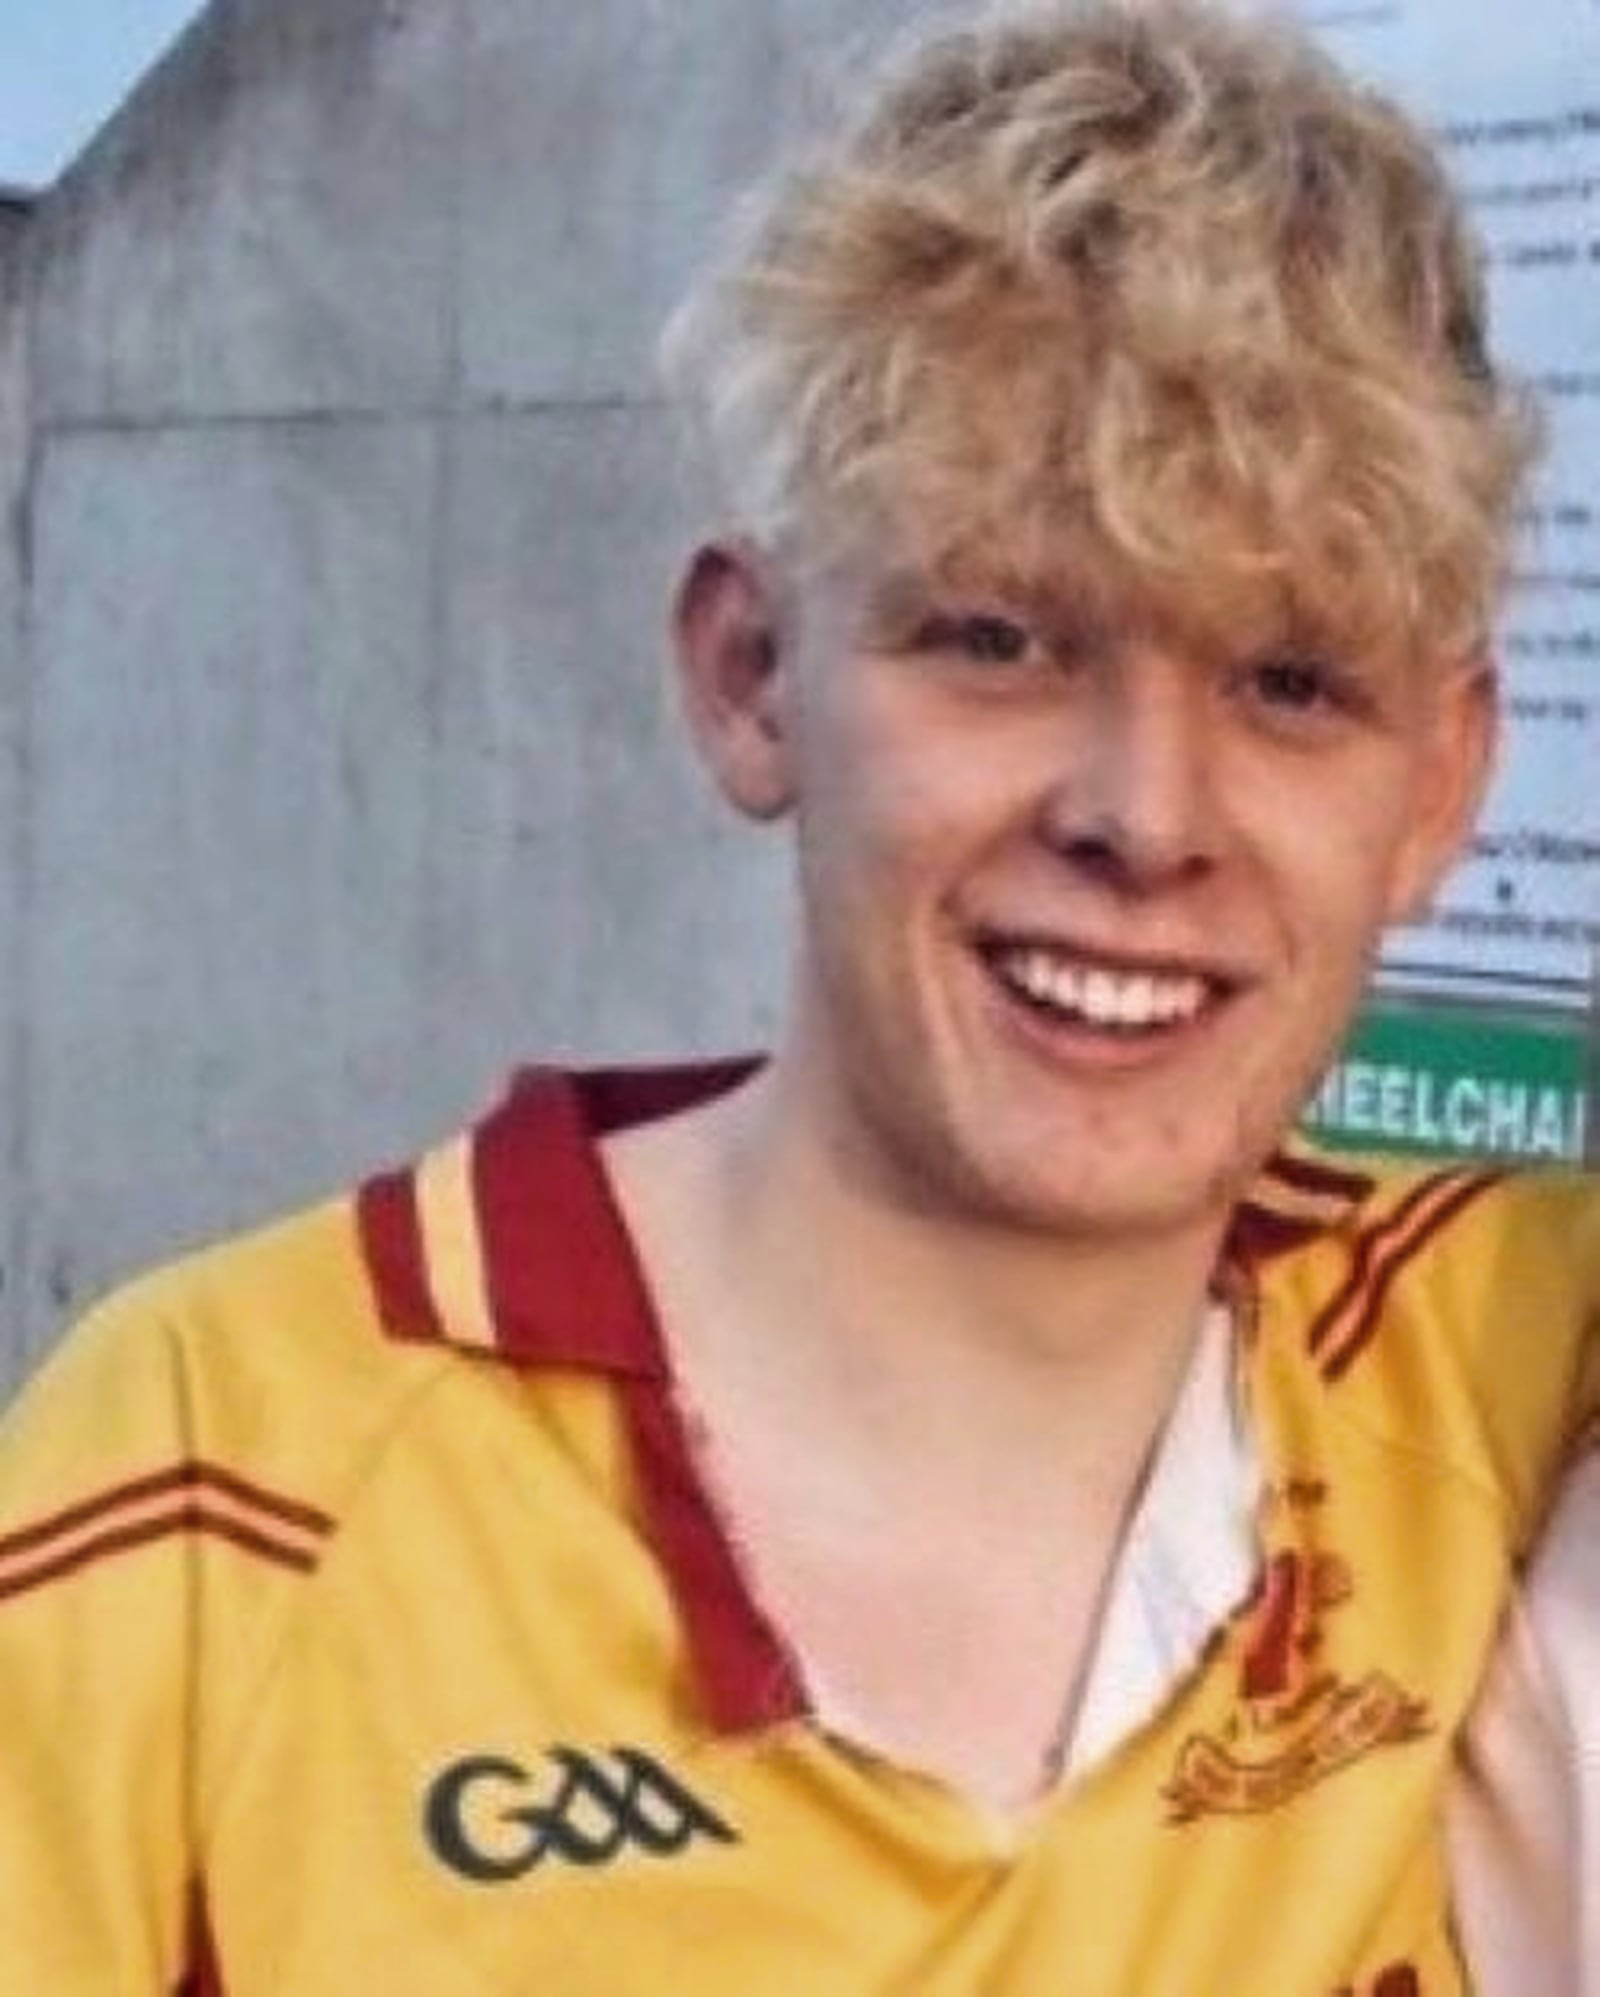 Rory Deegan (22), from Cullohill, Co Laois, was found unresponsive in a swimming pool on the Greek island of Zakynthos at the weekend and was later pronounced dead.